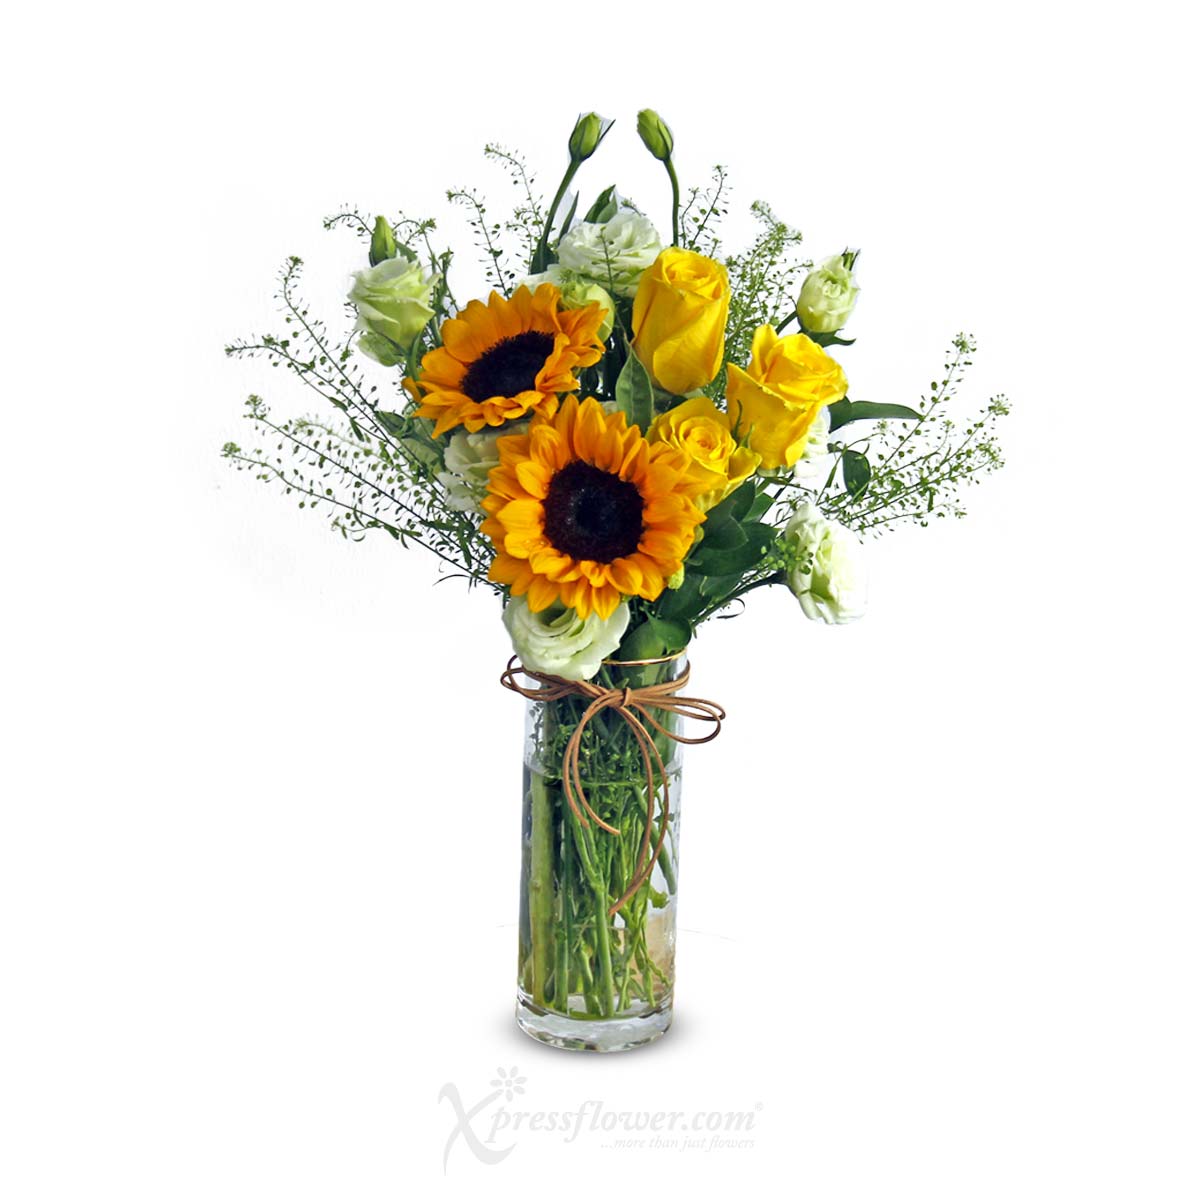 JH2307 Sunny Sunbeam (2 Sunflowers and 3 Yellow Roses with The Jelly Hearts Cake) 1b 11082023YJ